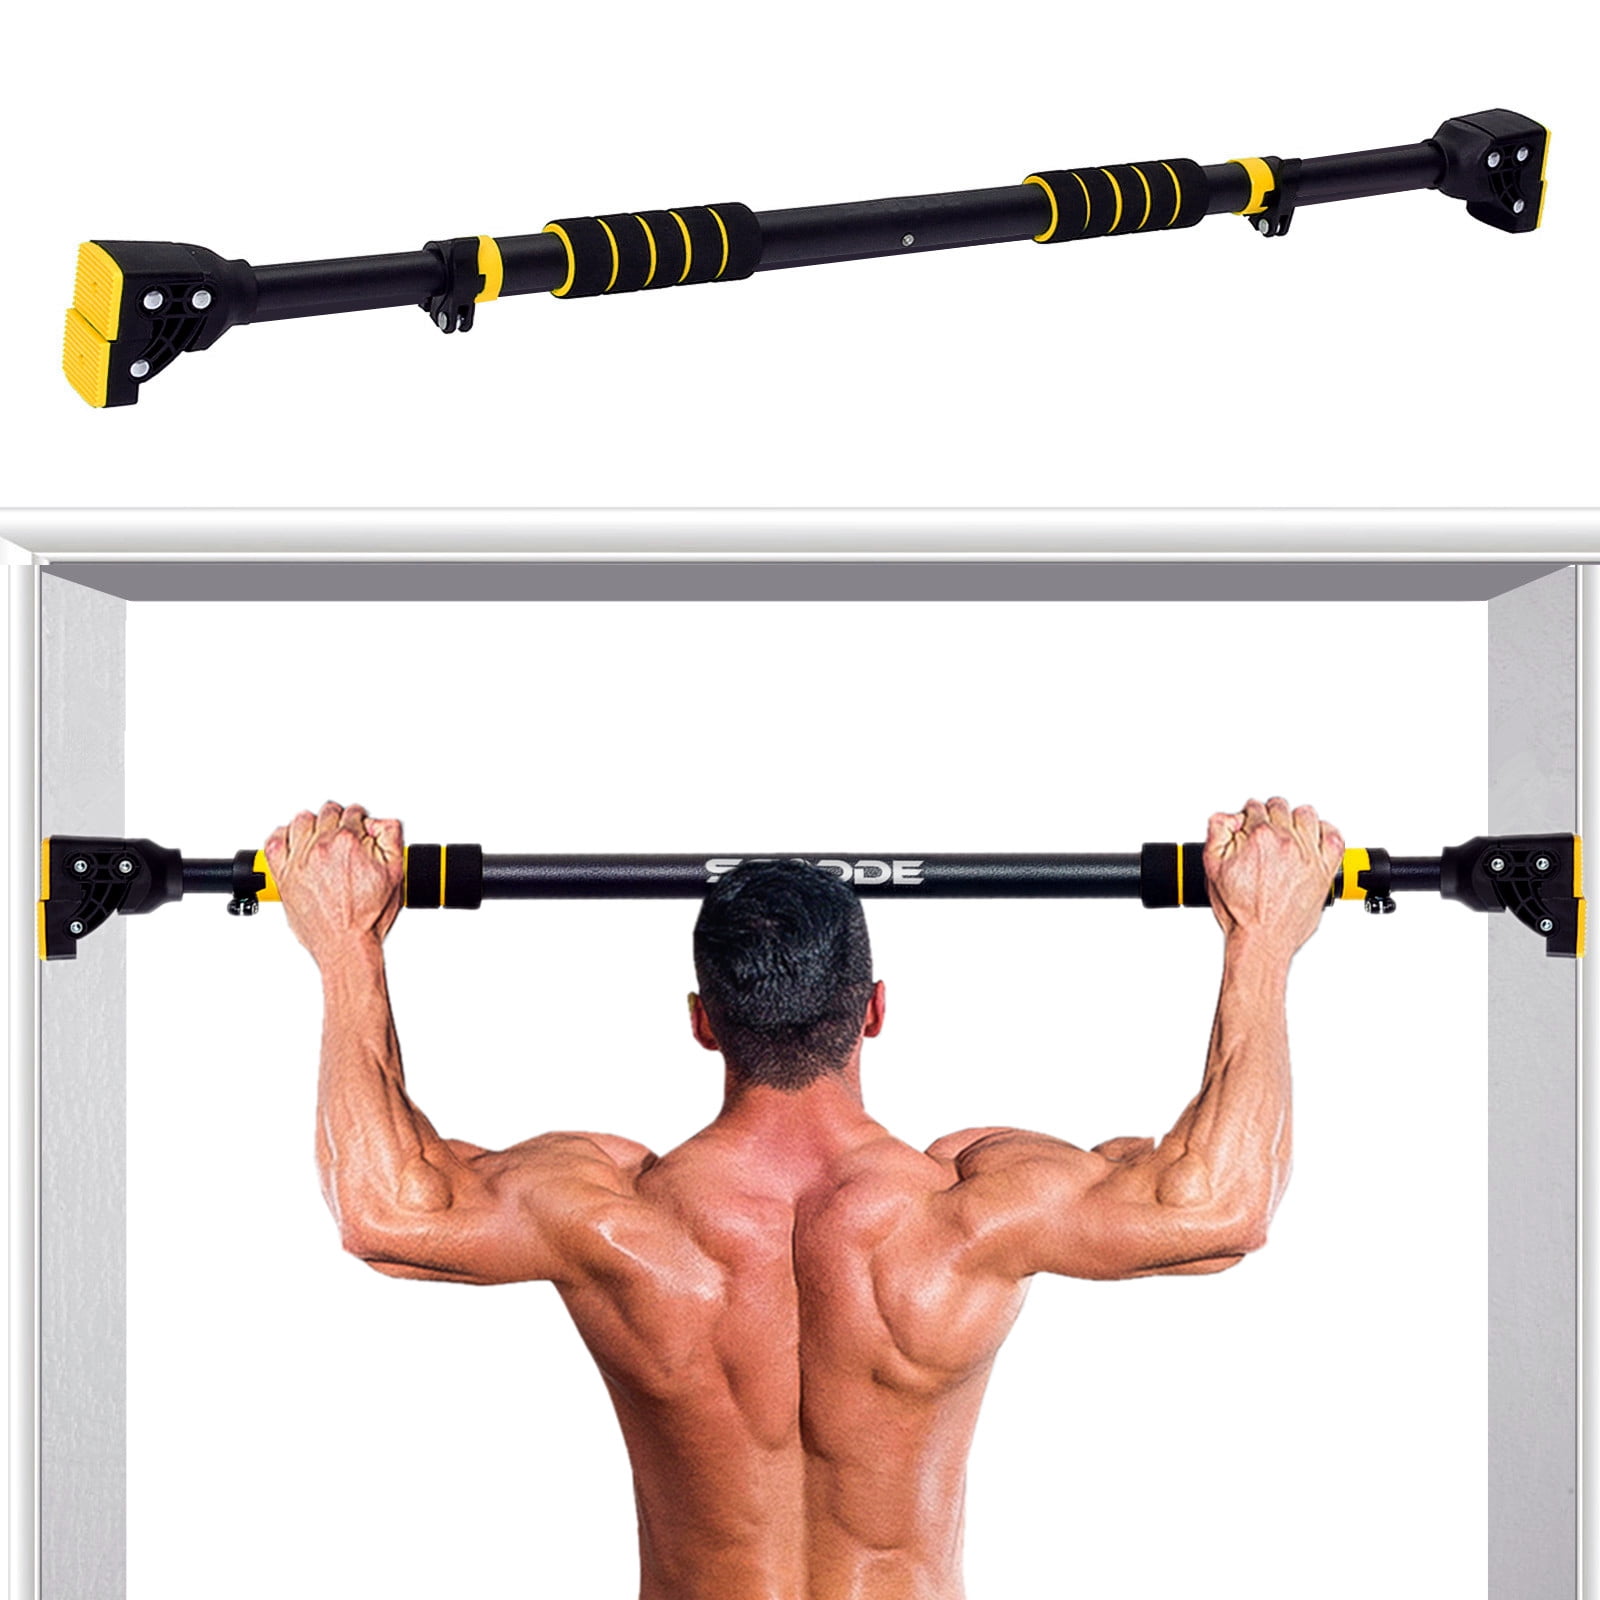 Door Bar Gym Door Bar Sit Up Pull Ups Pull Up Bar Fitness Bar Stainless Steel for Ups 62-100 cm Chin